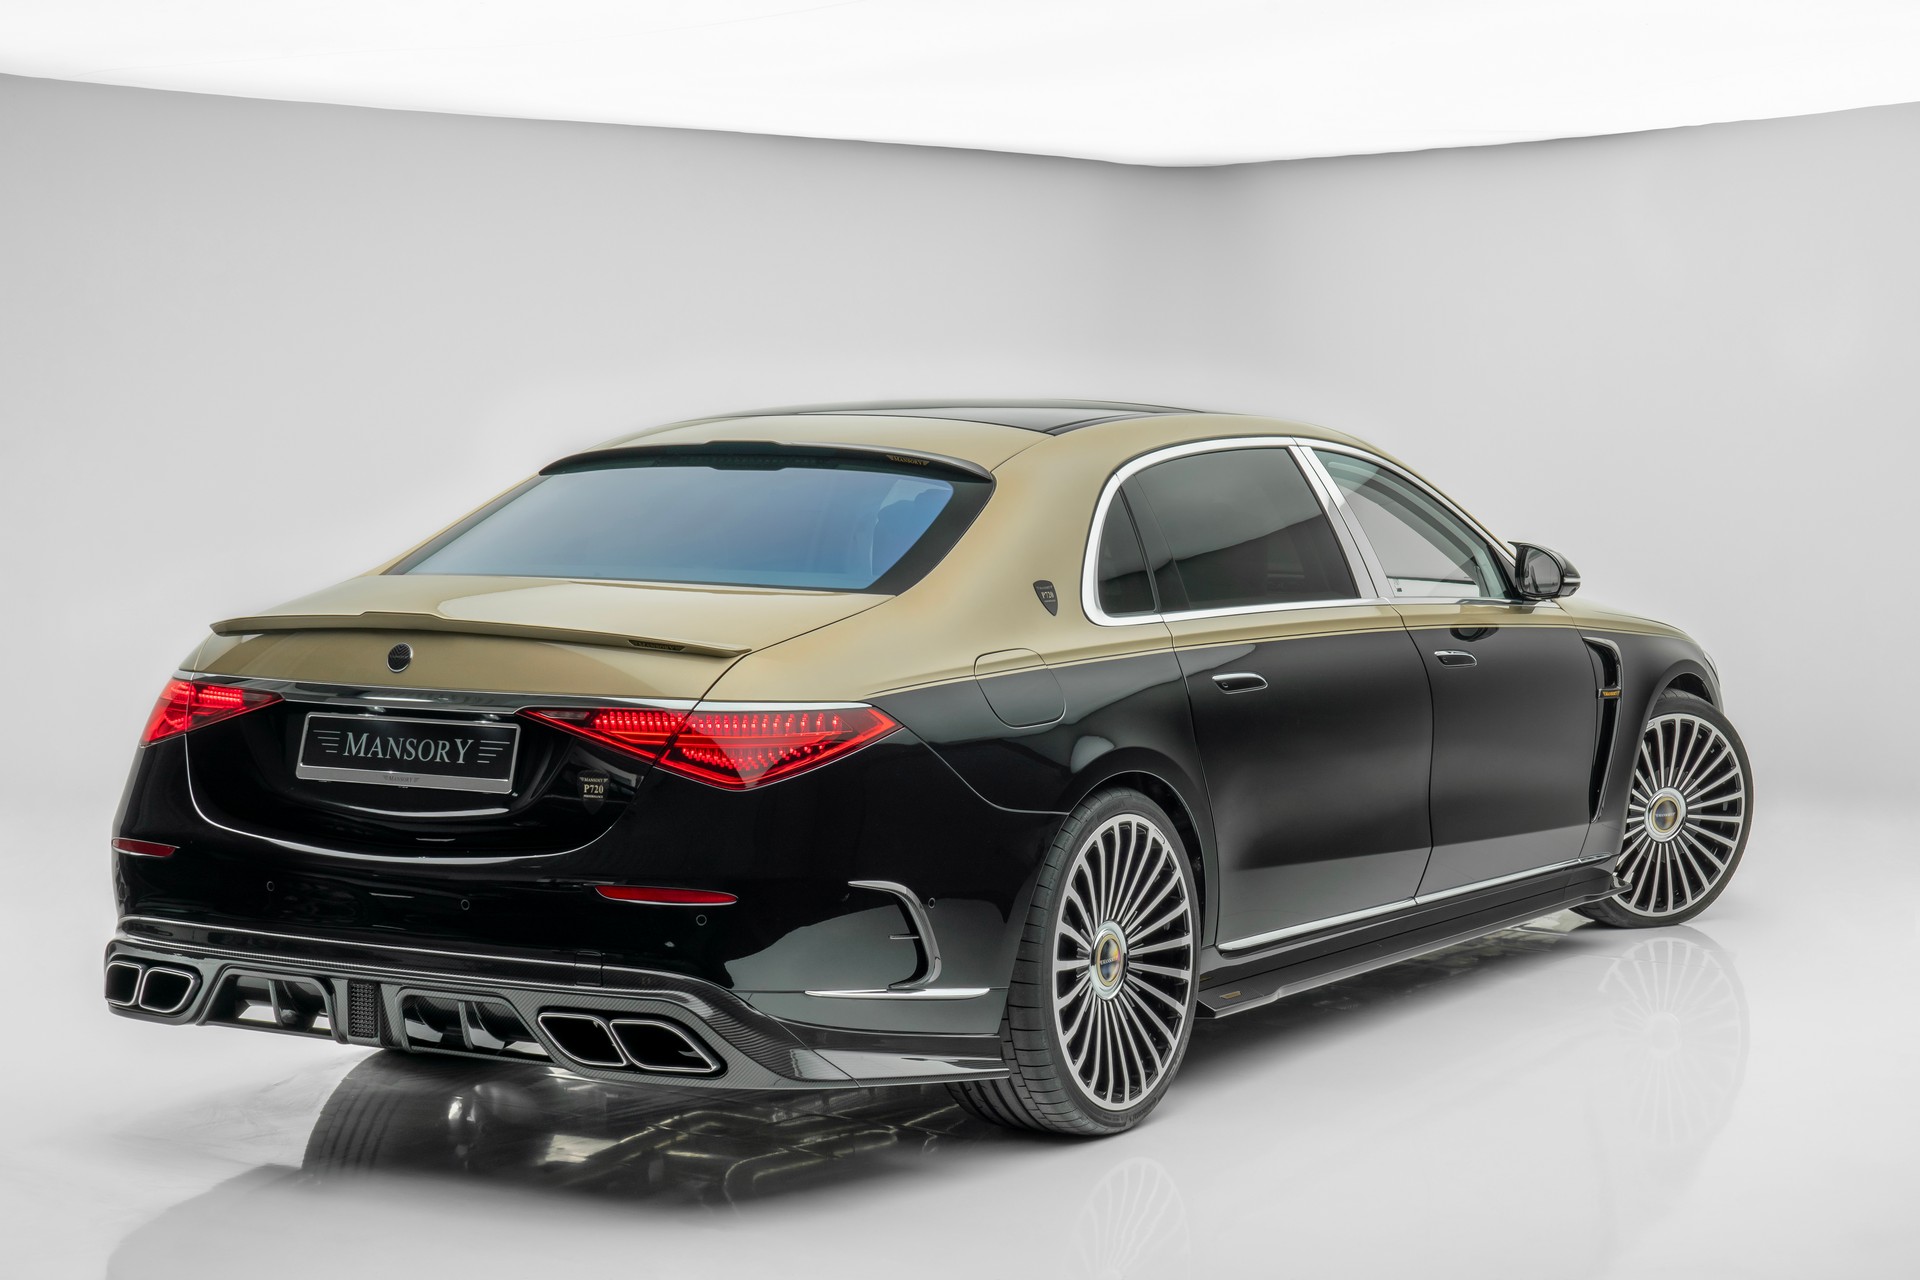 mercedes-maybach-s-class-do-mansory-cafeautovn-2